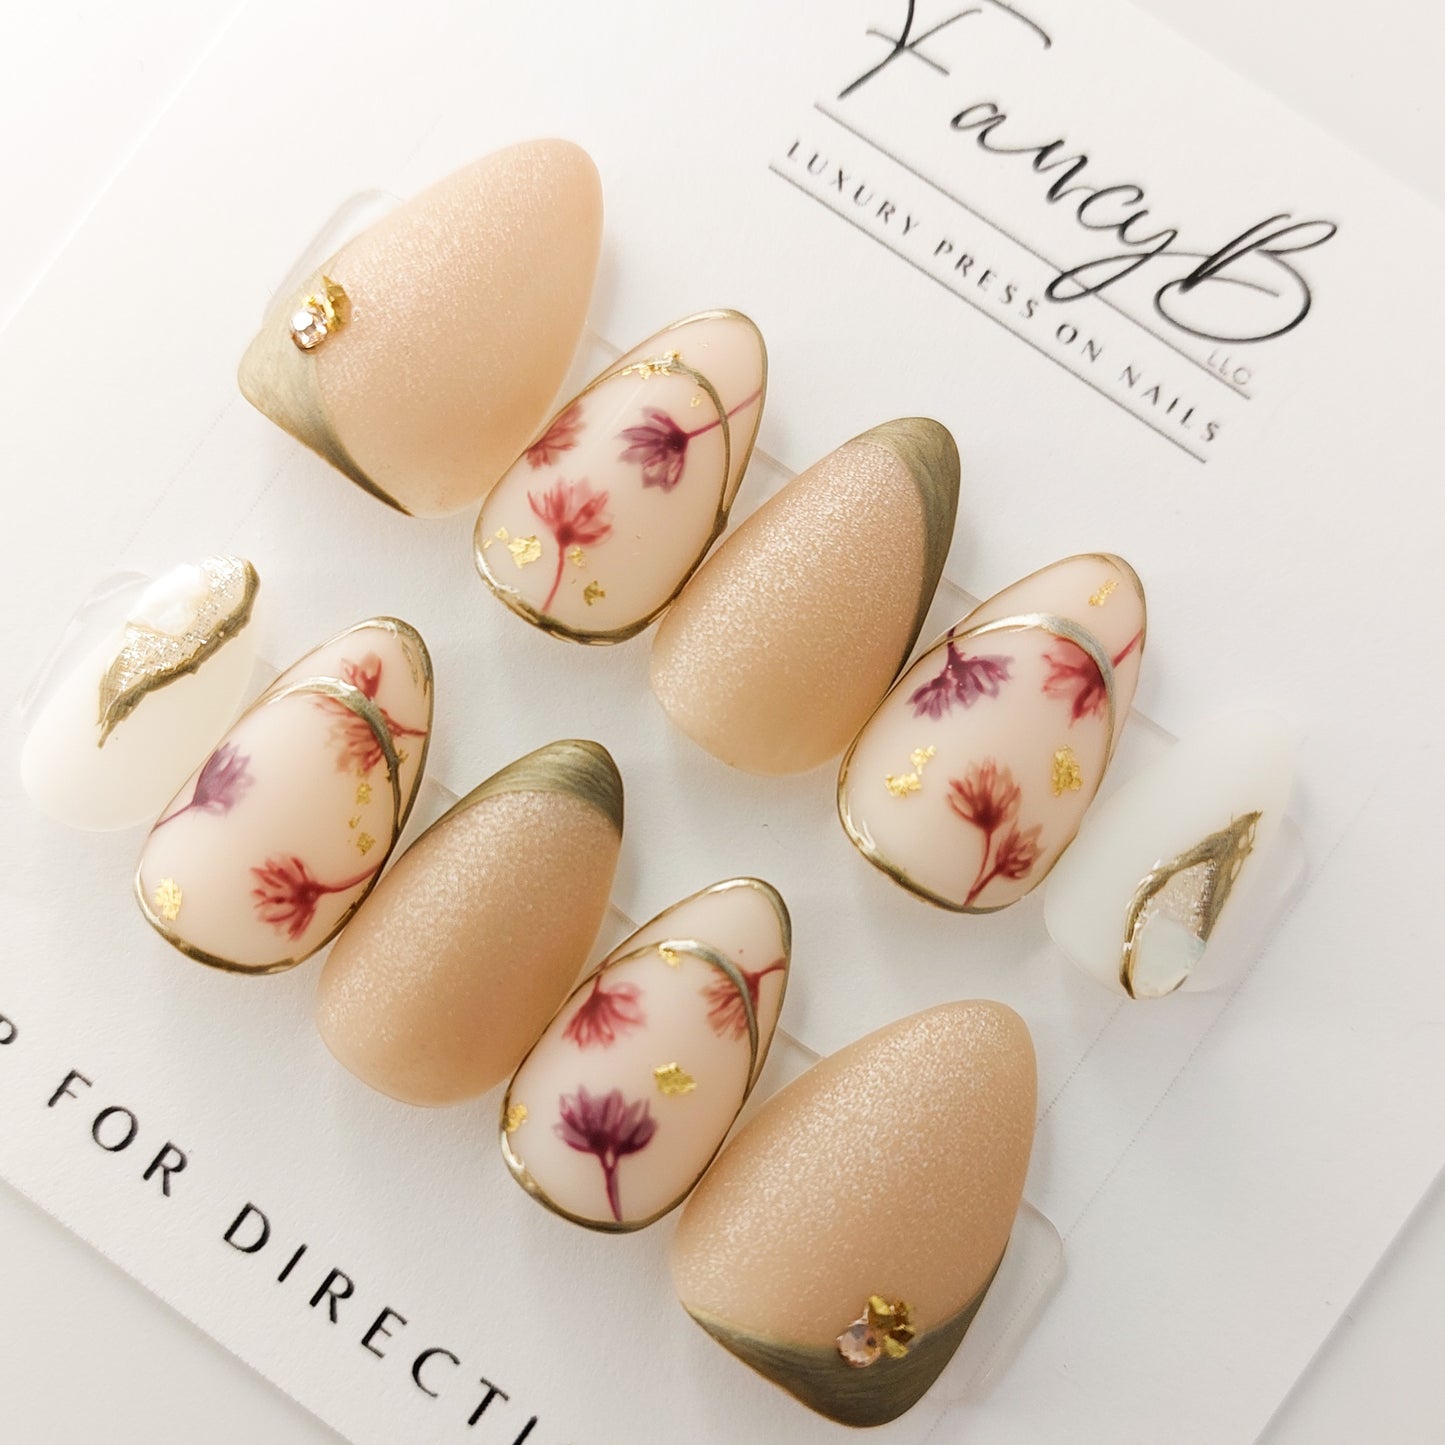 Custom press on nails with floral Japanese nail art press on nails with watercolor flowers on a nude background, with metallic accents and rose gold gems.